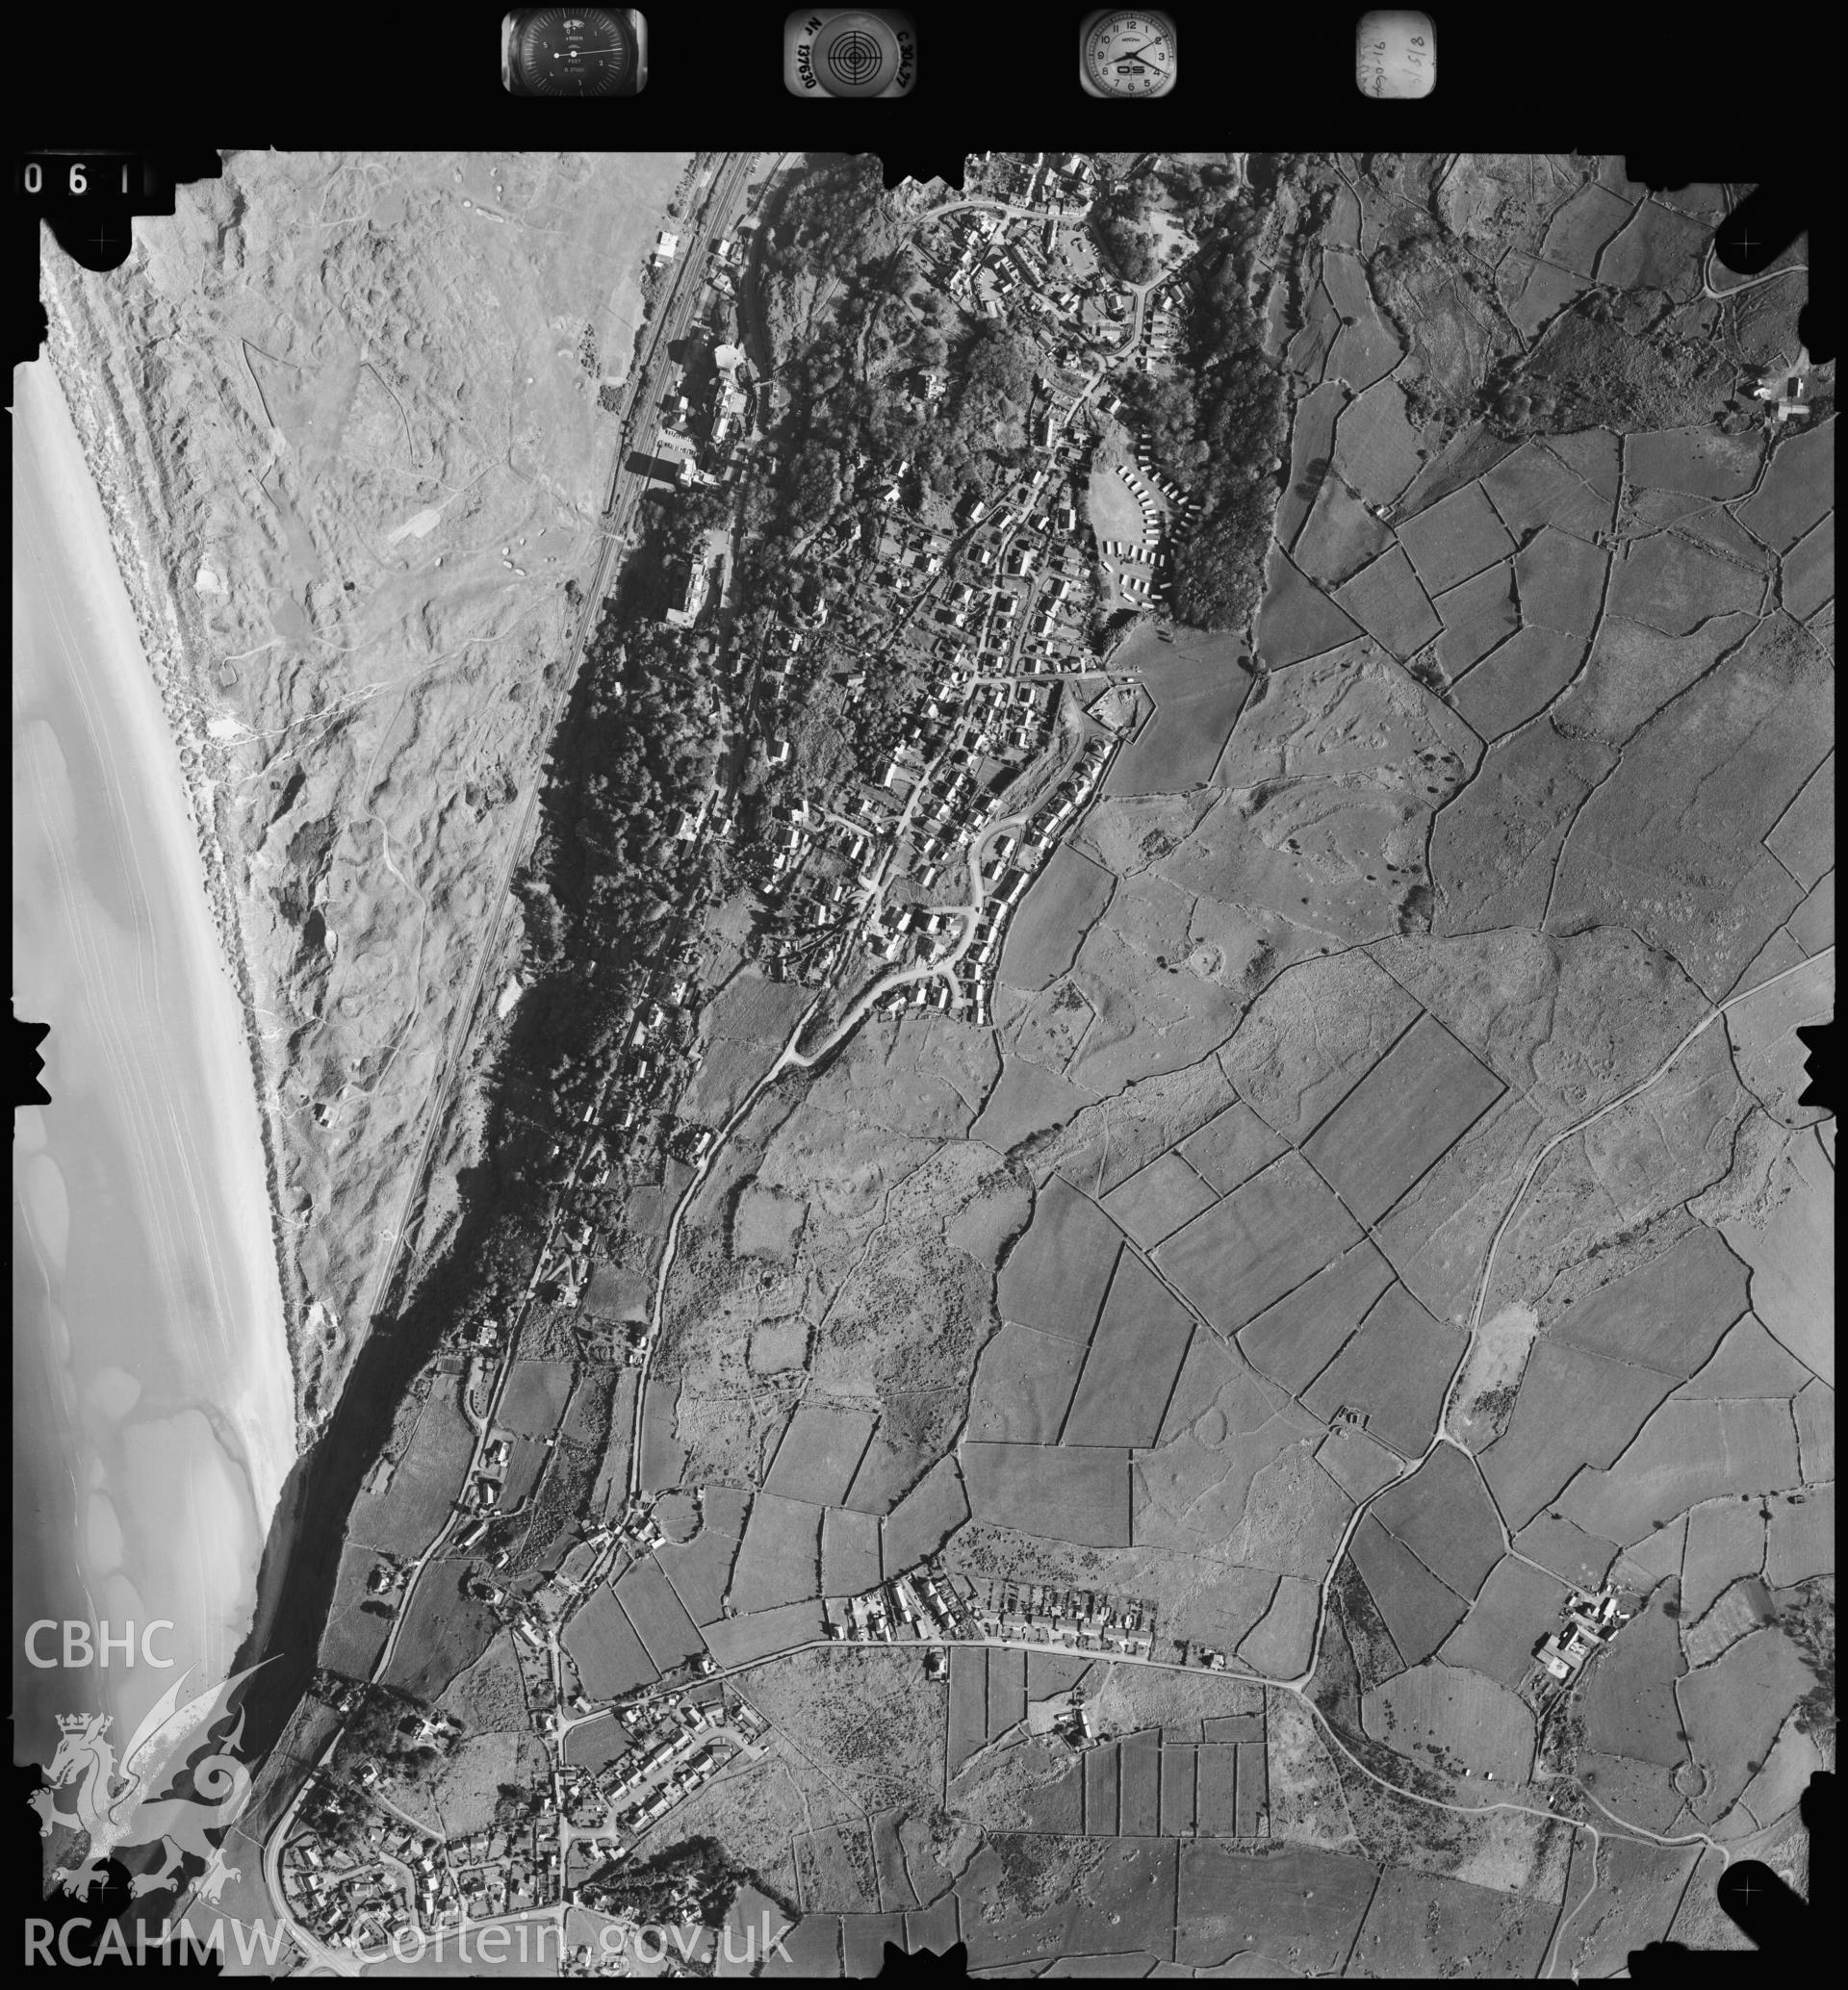 Digitized copy of an aerial photograph showing Harlech area, taken by Ordnance Survey, 1991.